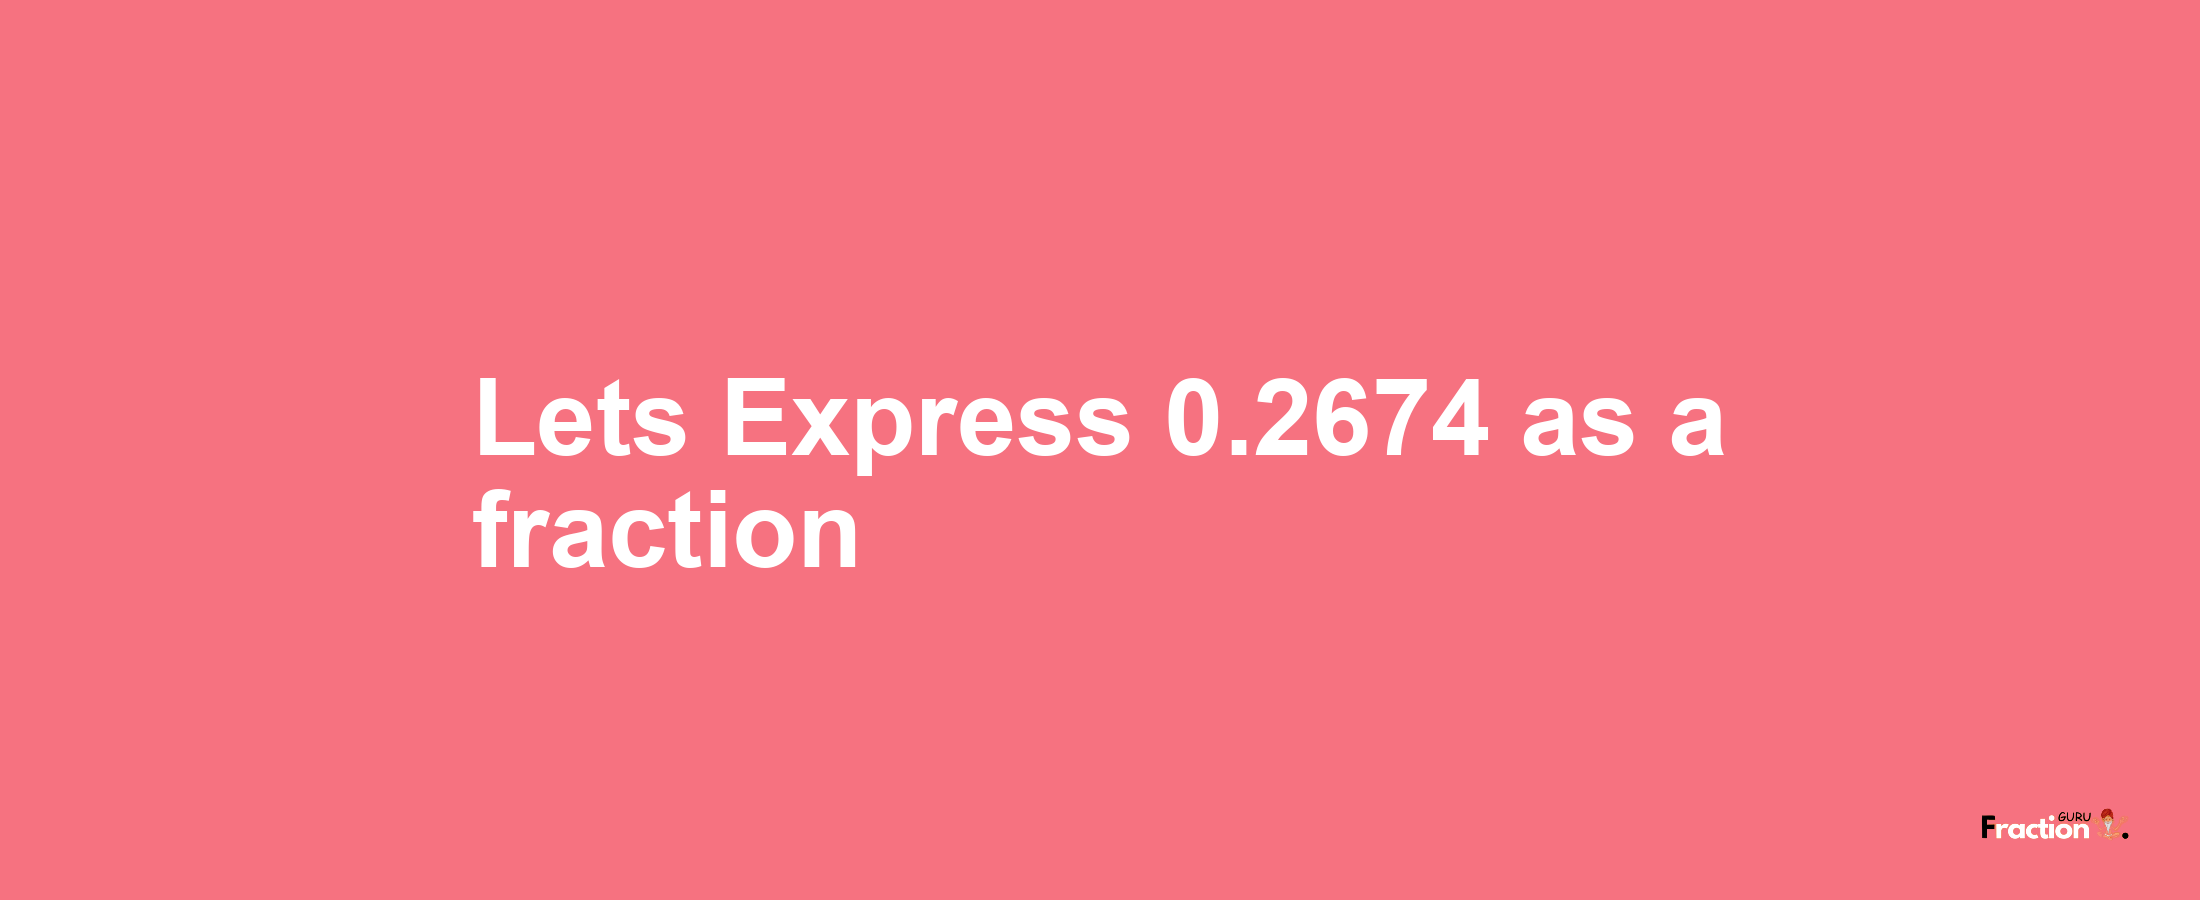 Lets Express 0.2674 as afraction